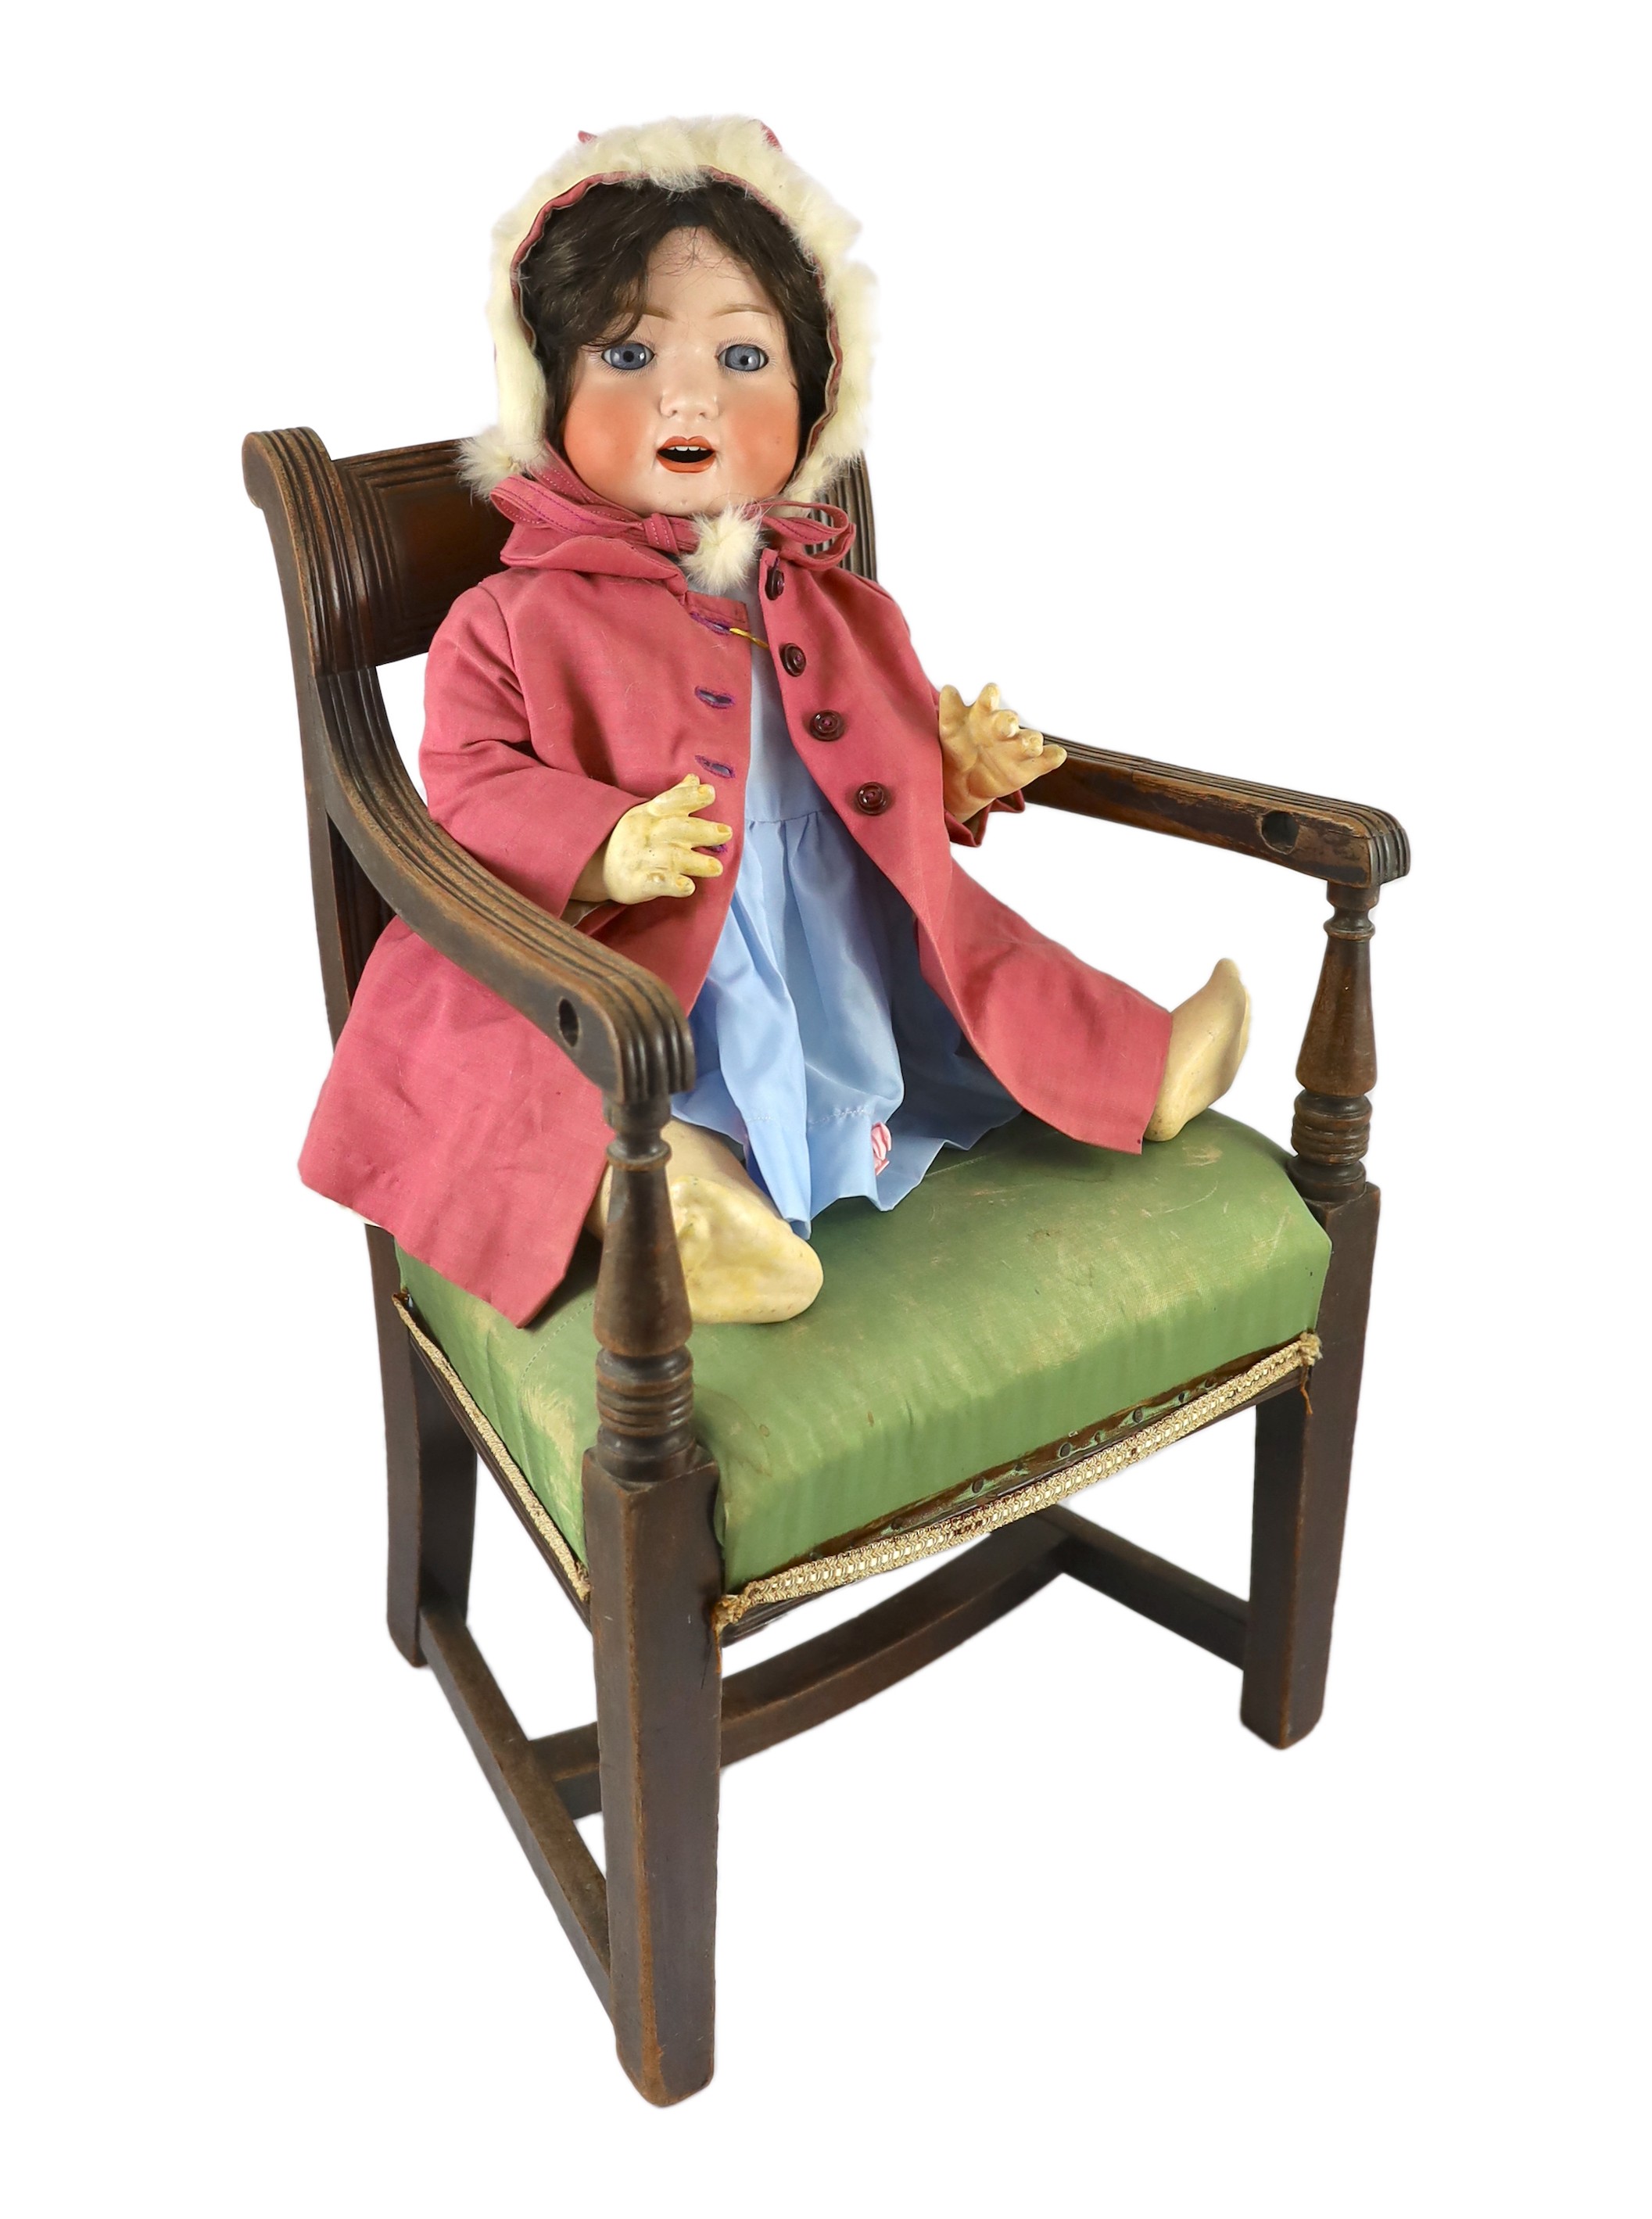 A Heubach Koppelsdorf bisque doll, German, circa 1914, 23in. Please note the chair is for display purposes only.                                                                                                            